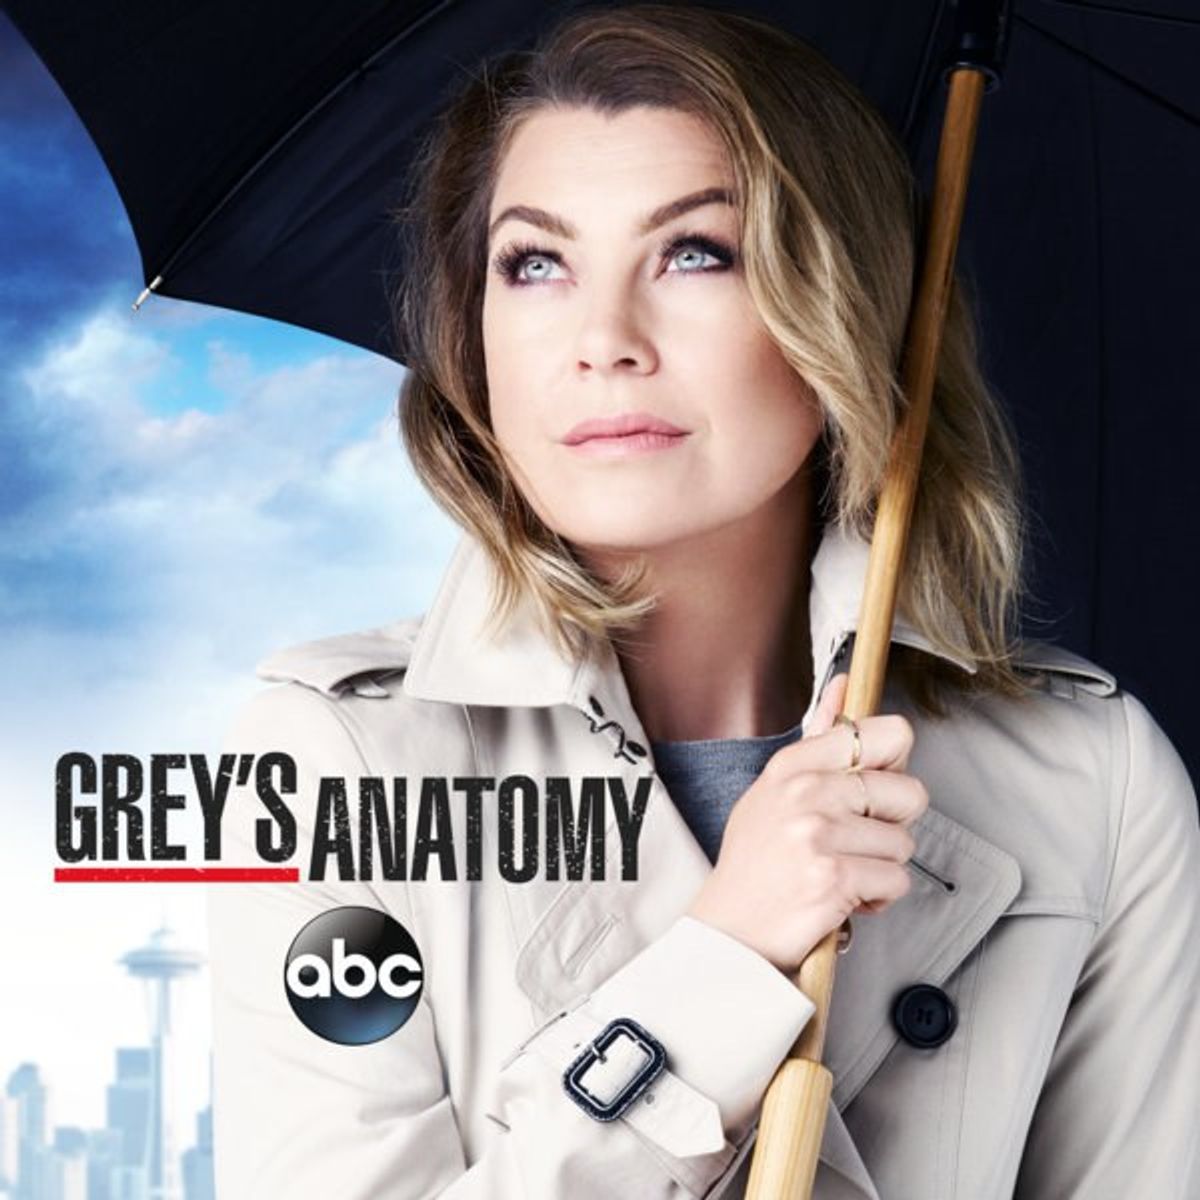 10 Things I've Learned from Grey's Anatomy